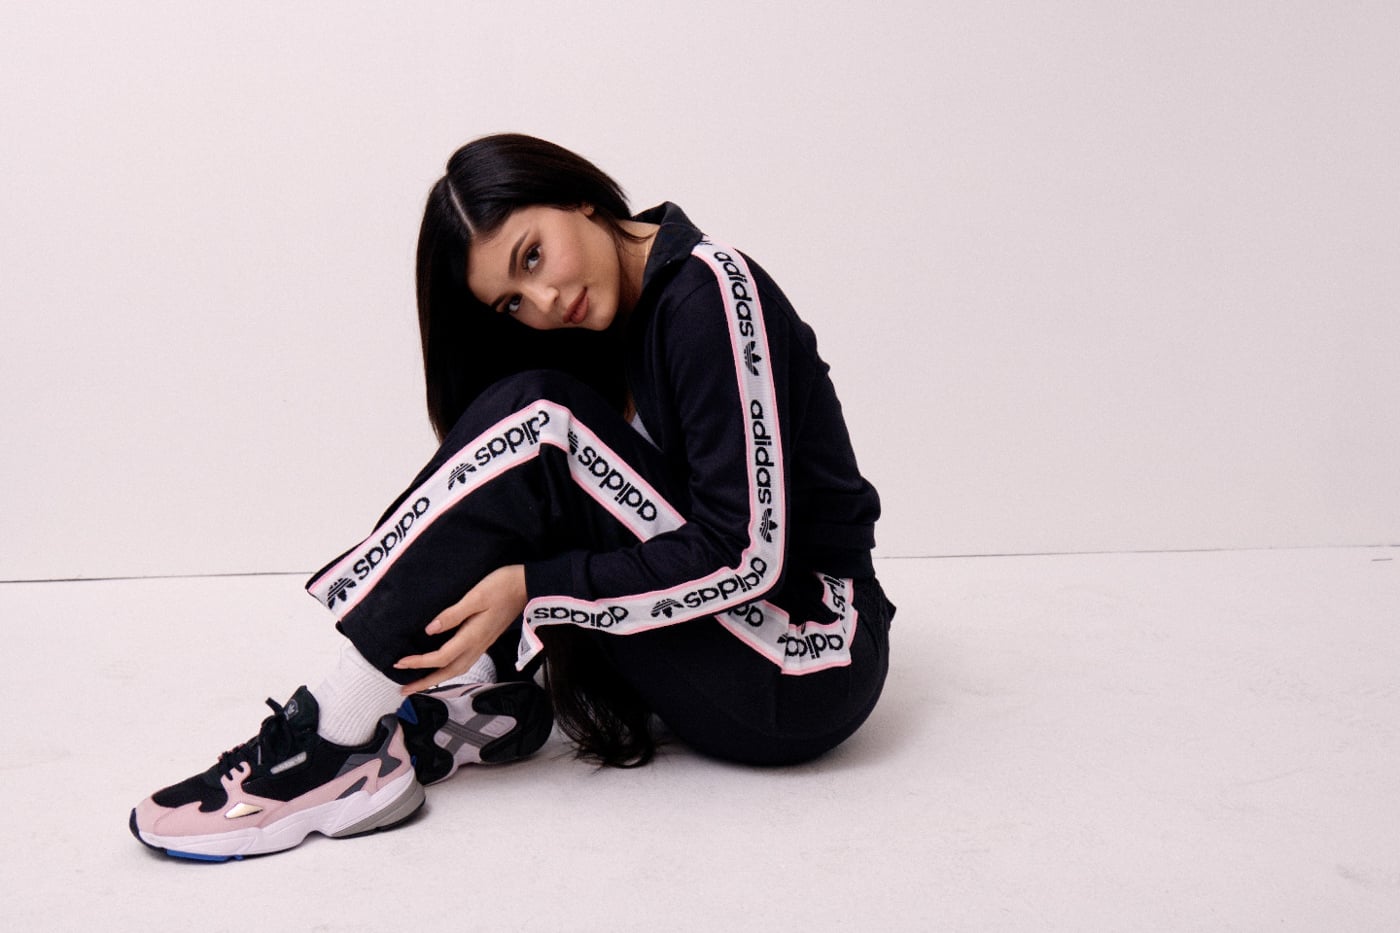 Fashion, Shopping & Style | With Kylie Modeling Adidas They Sure to Sell Out FAST | POPSUGAR Fashion Photo 12